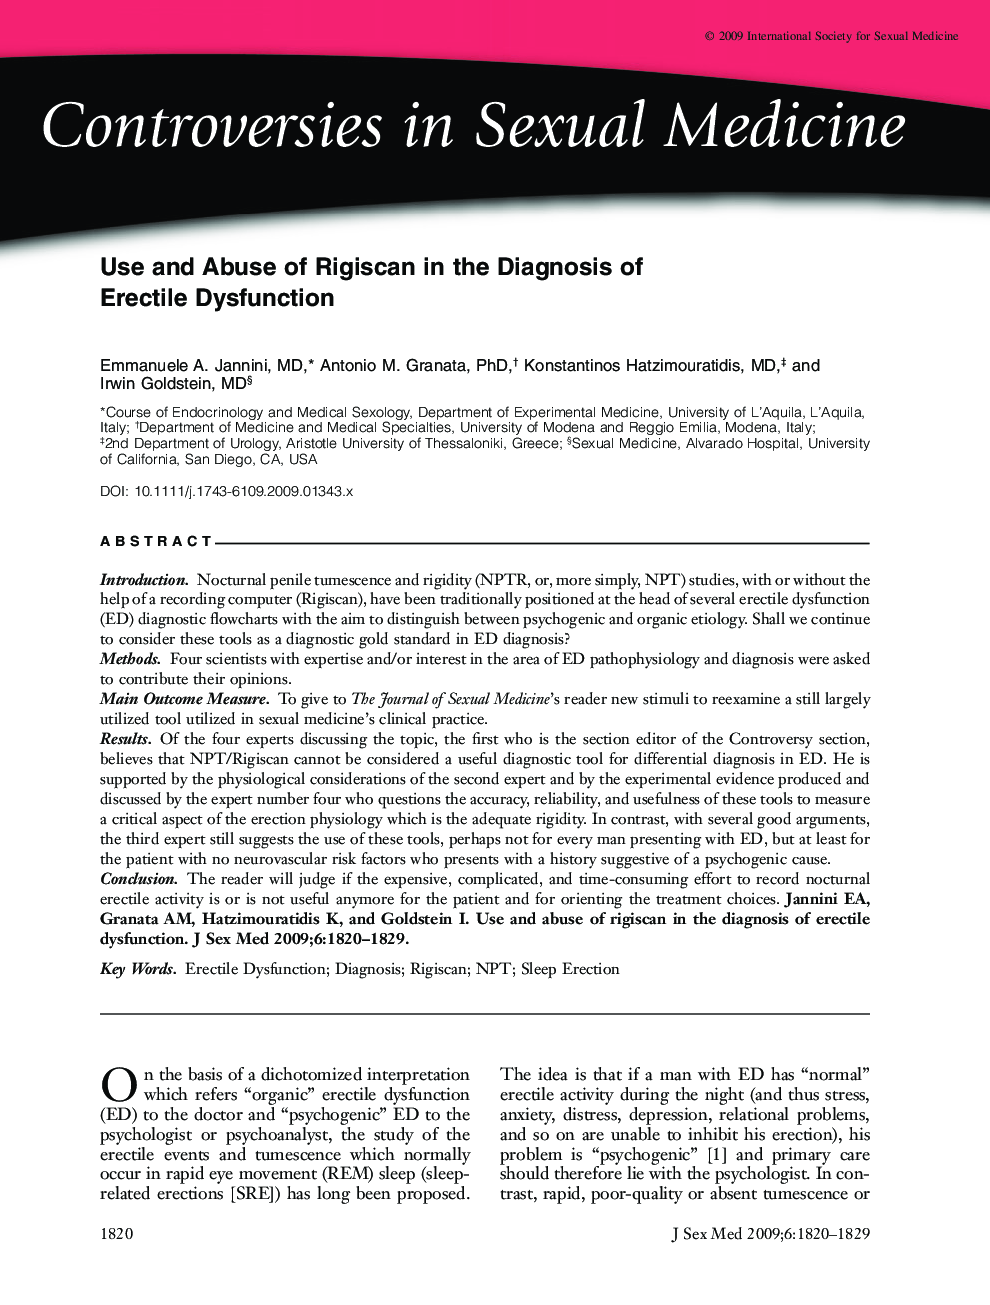 Controversies in Sexual Medicine: Use and Abuse of Rigiscan in the Diagnosis of Erectile Dysfunction